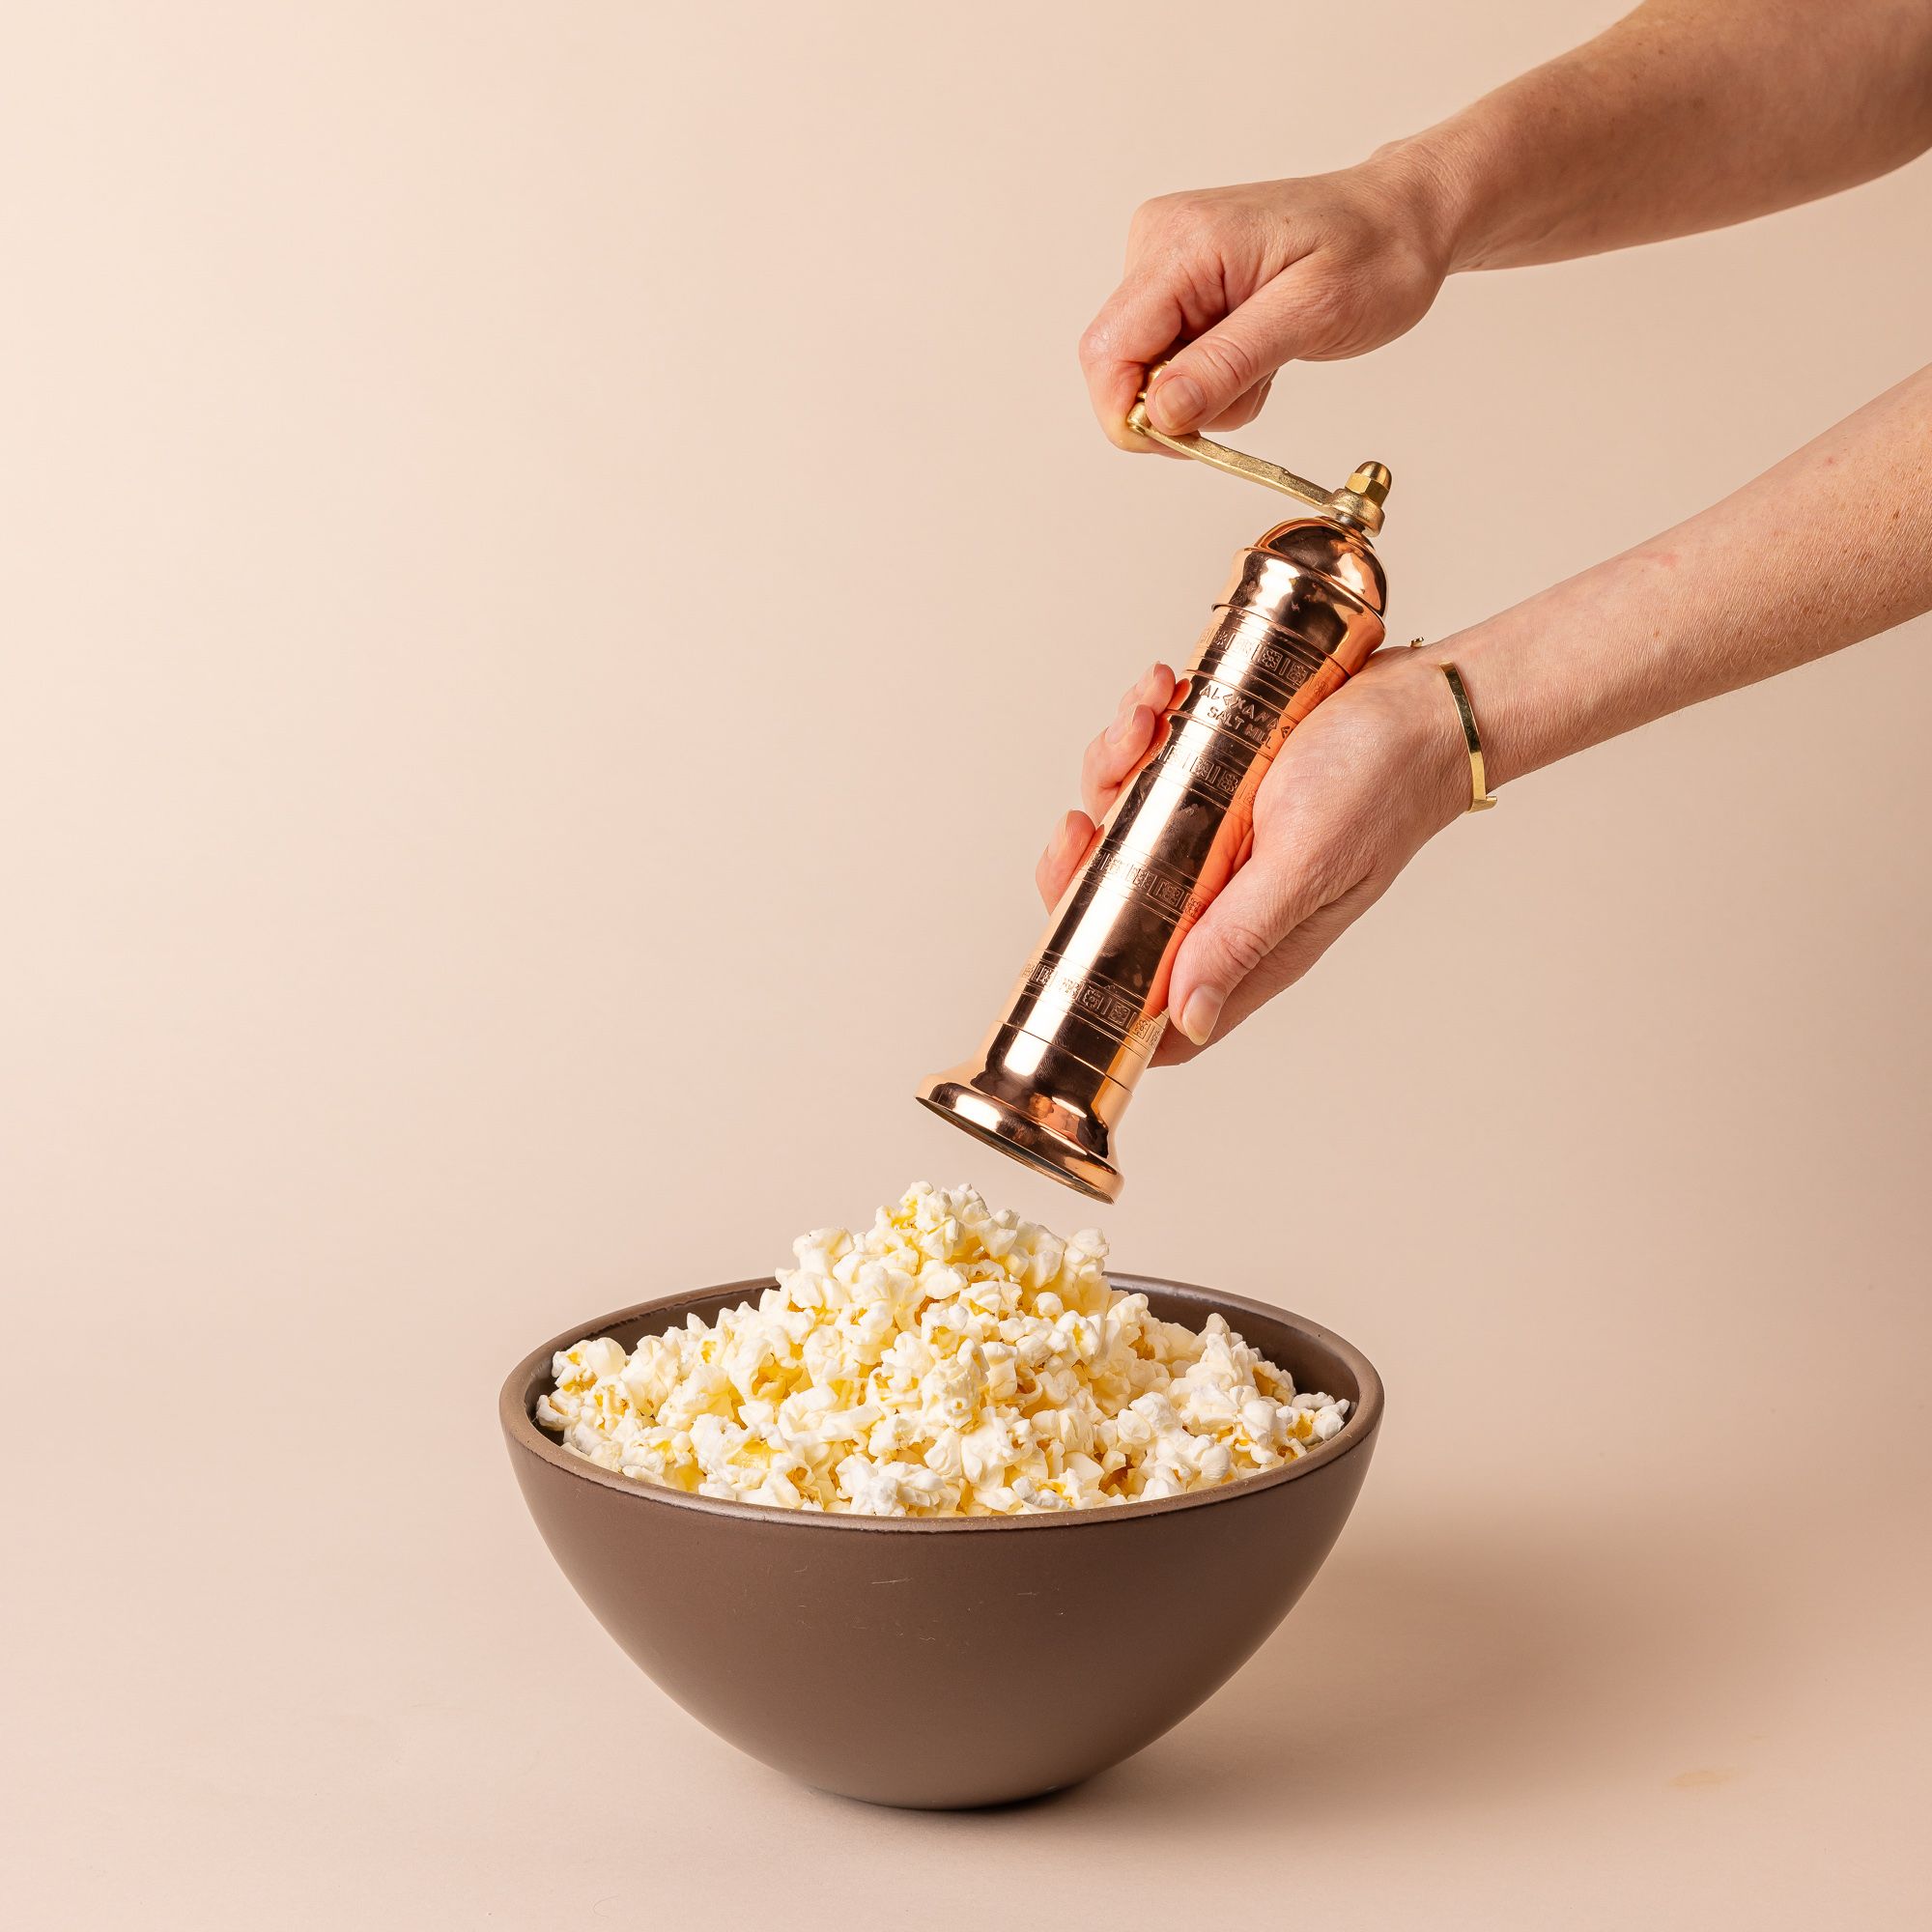 A hand holding a narrow all copper salt mill with a flanged base and rotating the grinder above a bowl of popcorn.